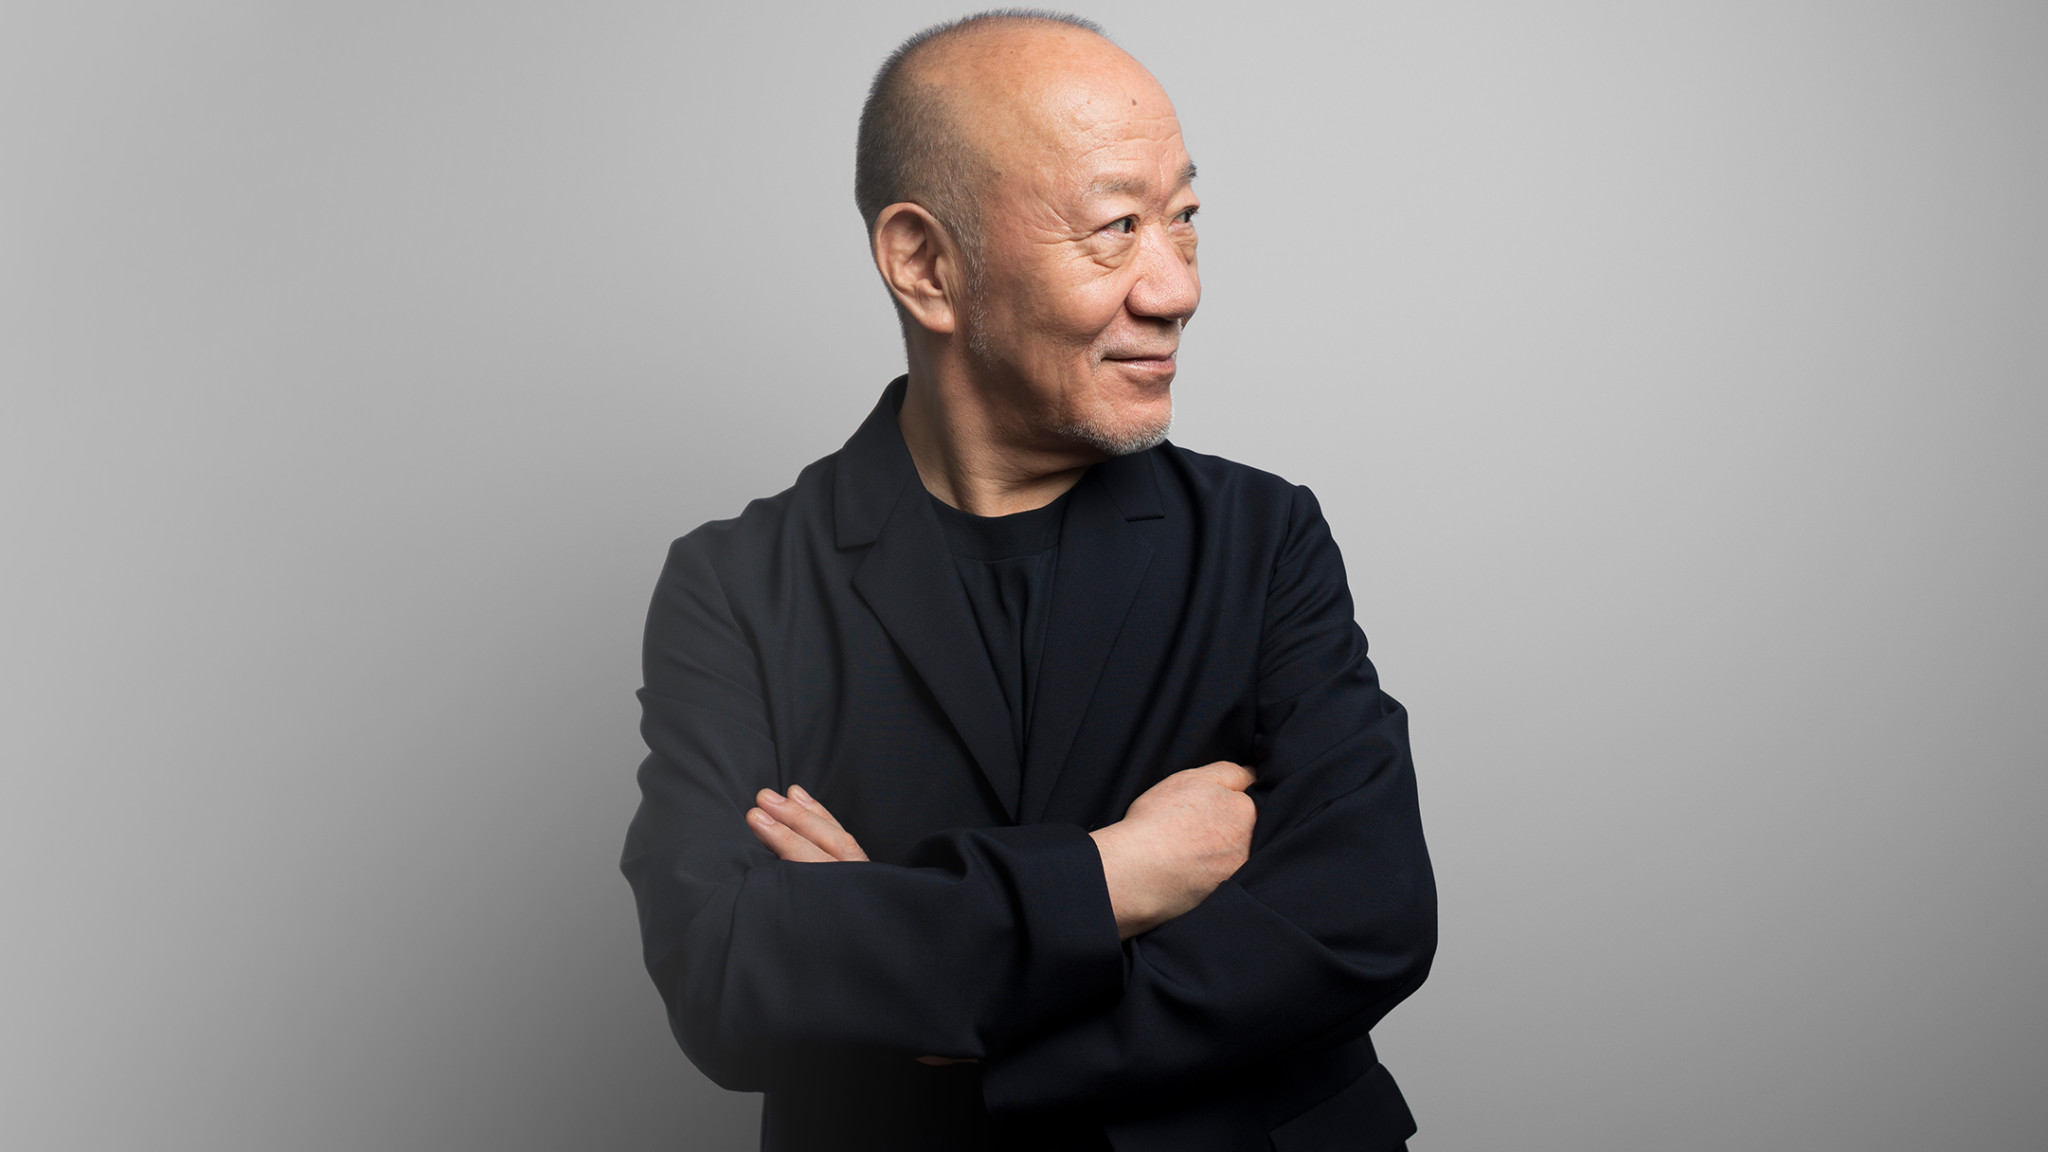 Joe Hisaishi, Japan’s Most Influential Composer of Film and Classical Music, Presents his Debut Deutsche Grammophon Album